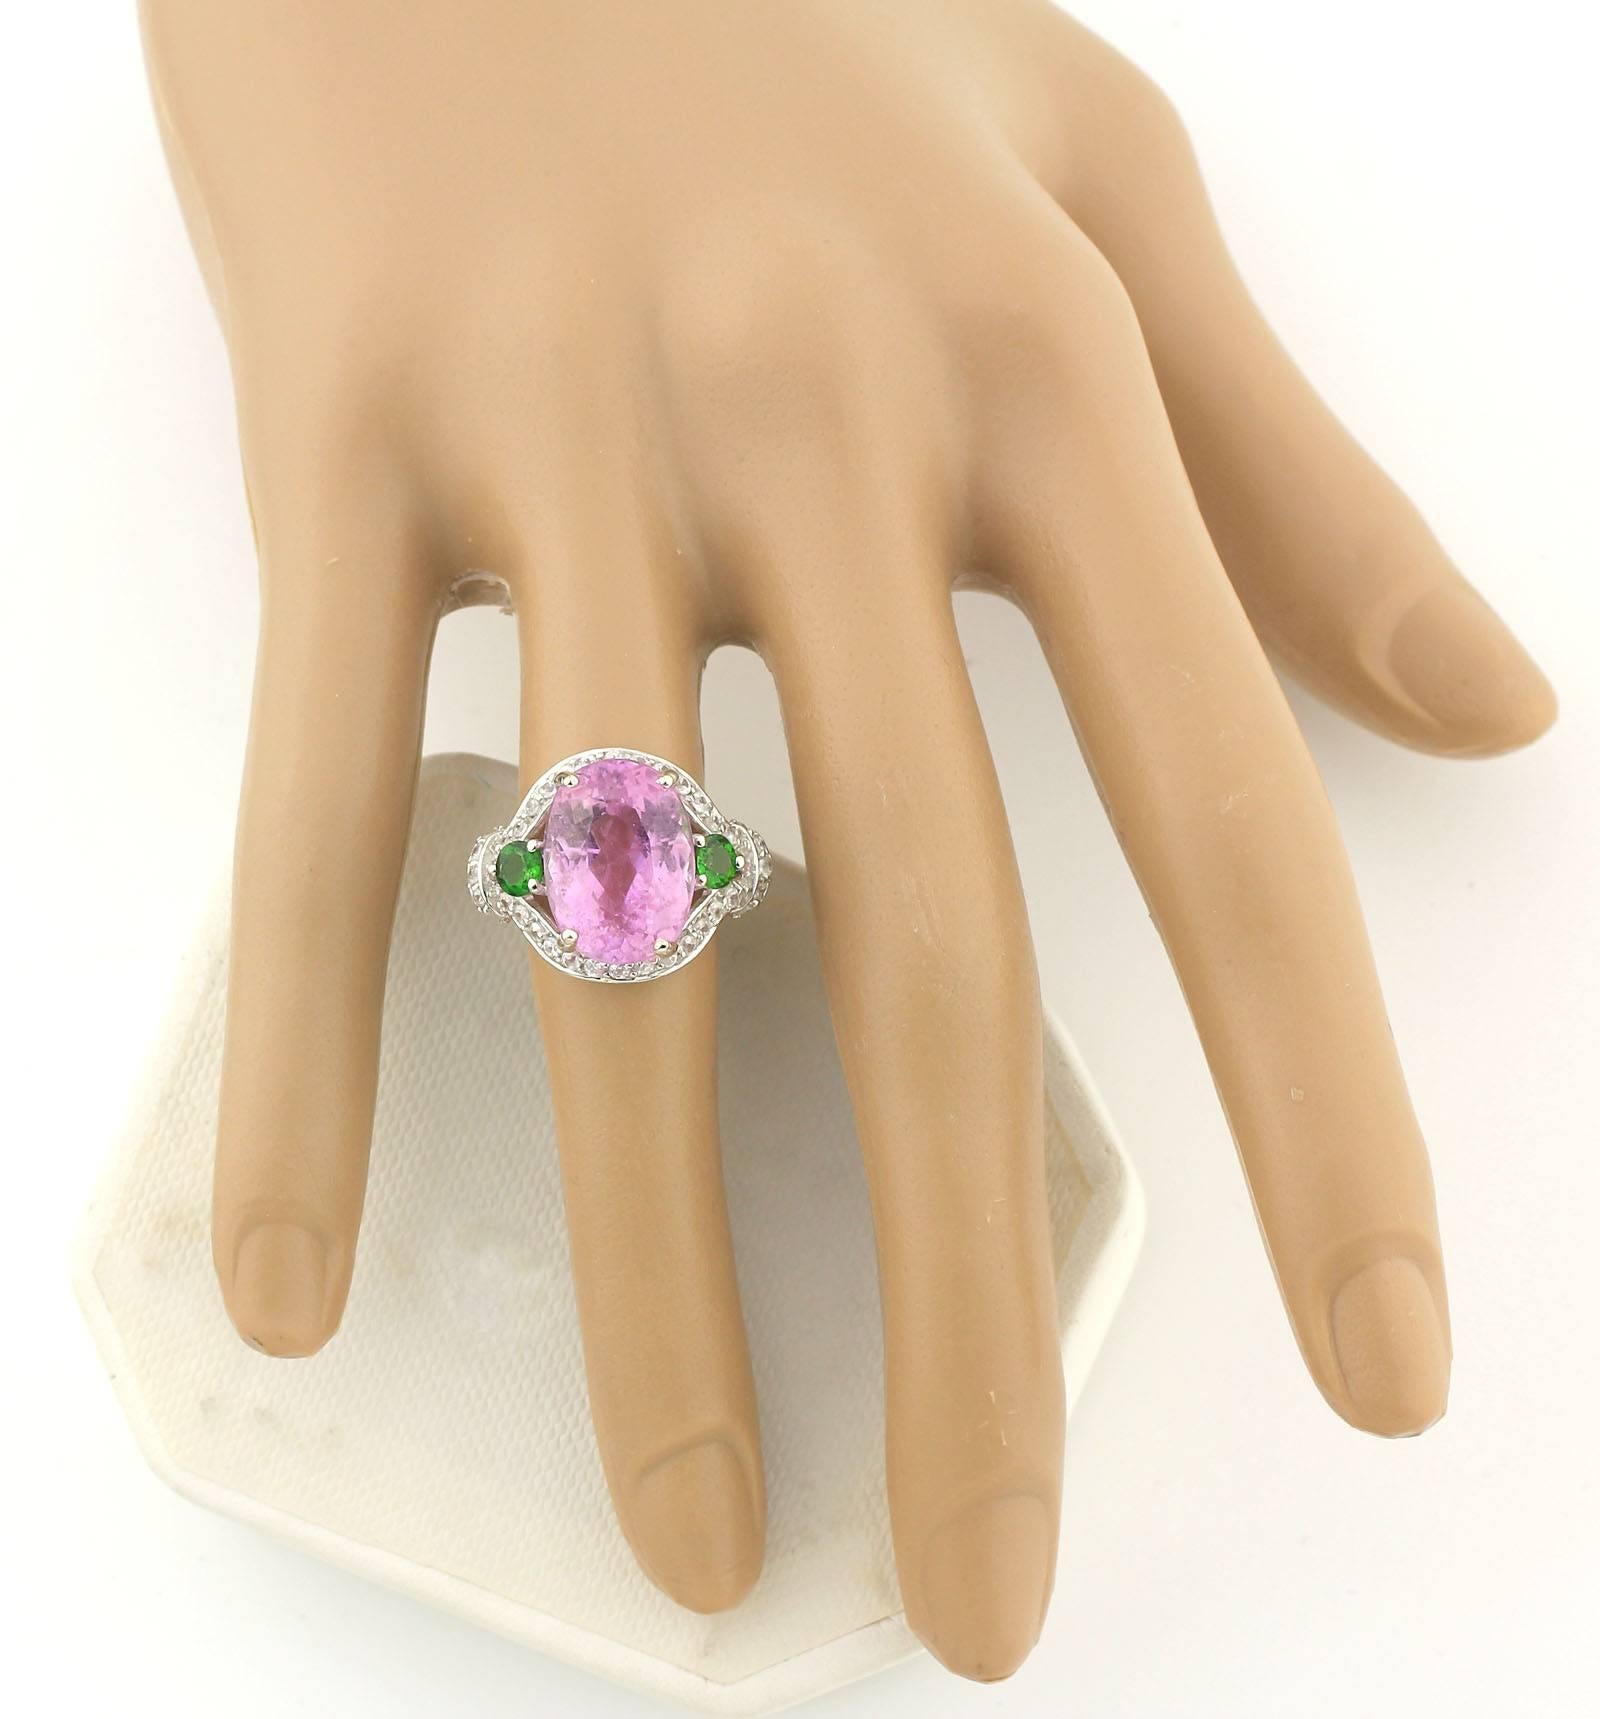 Sparkling brilliant natural 9.25 Carat Pink Kunzite enhanced with sparkly green Chrome Diopside and brilliant natural Zircons set in this unique handmade Sterling Silver ring. The quality and color of this Kunzite is superb.
Size:  15 mm x 11